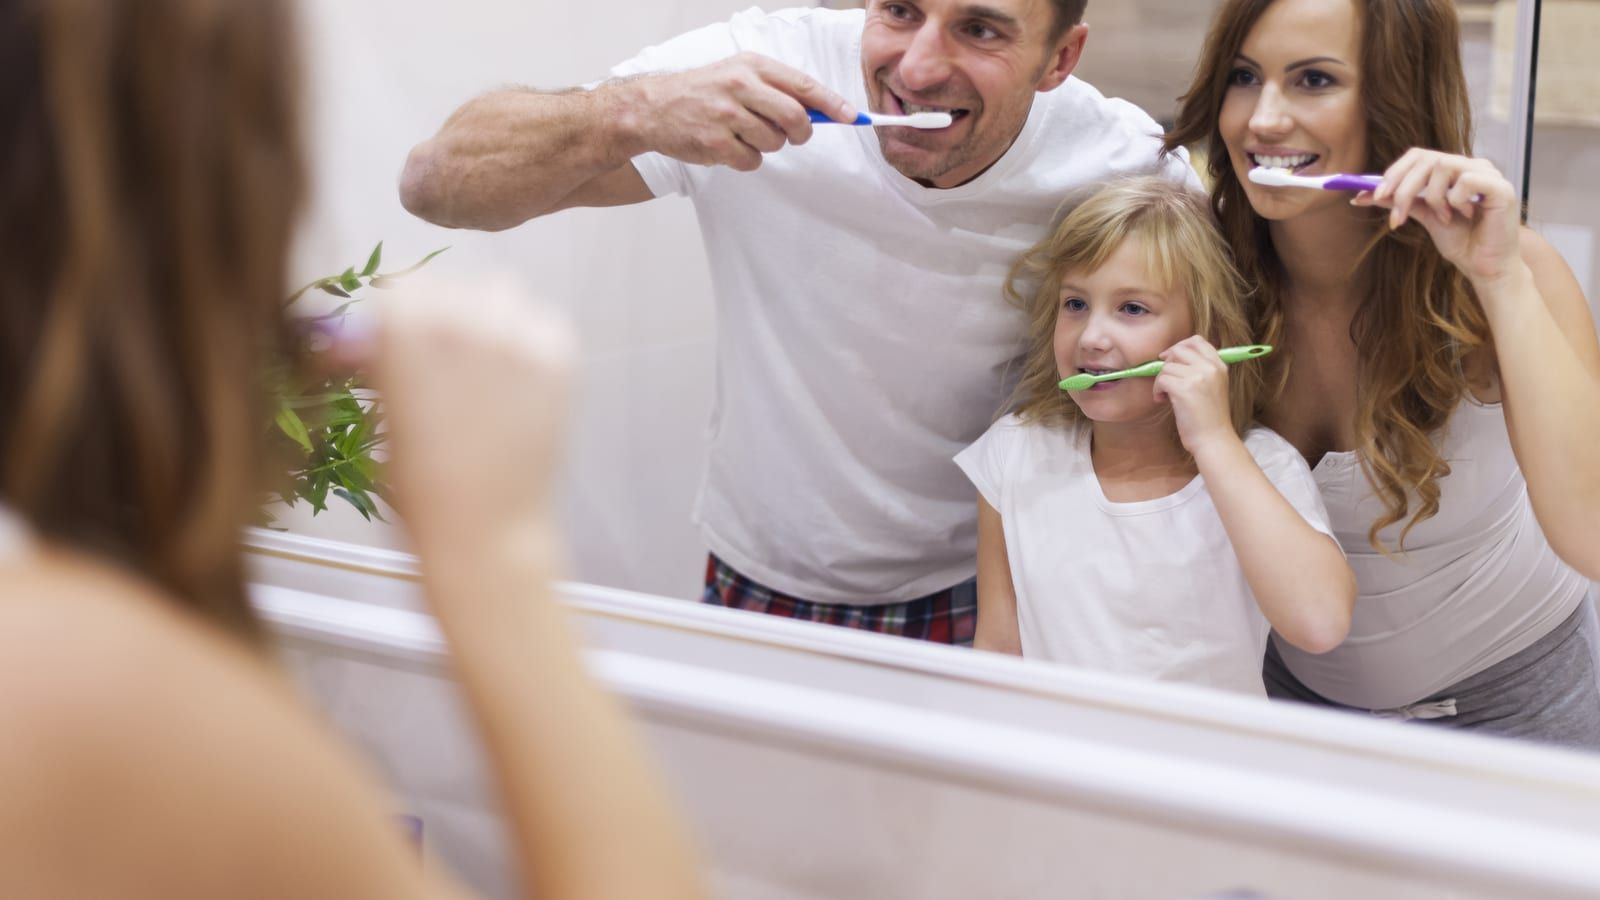 Adult and child brushing teeth